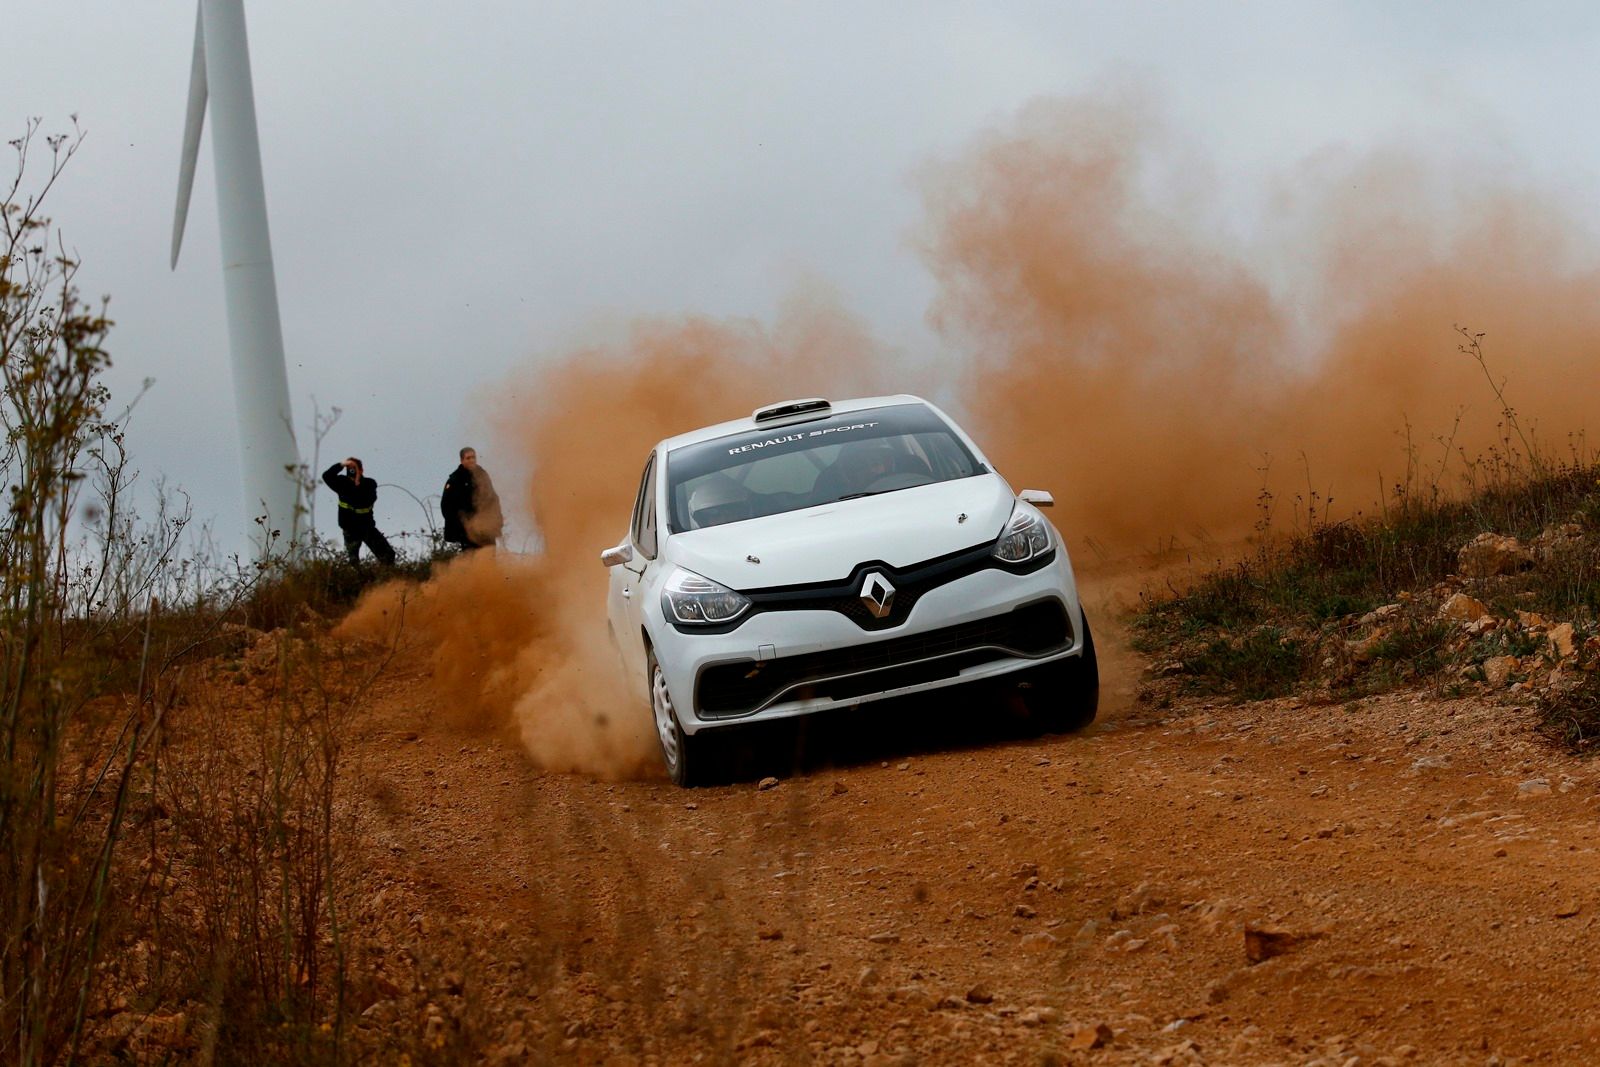 2013 Renault Clio R3T Rally Car